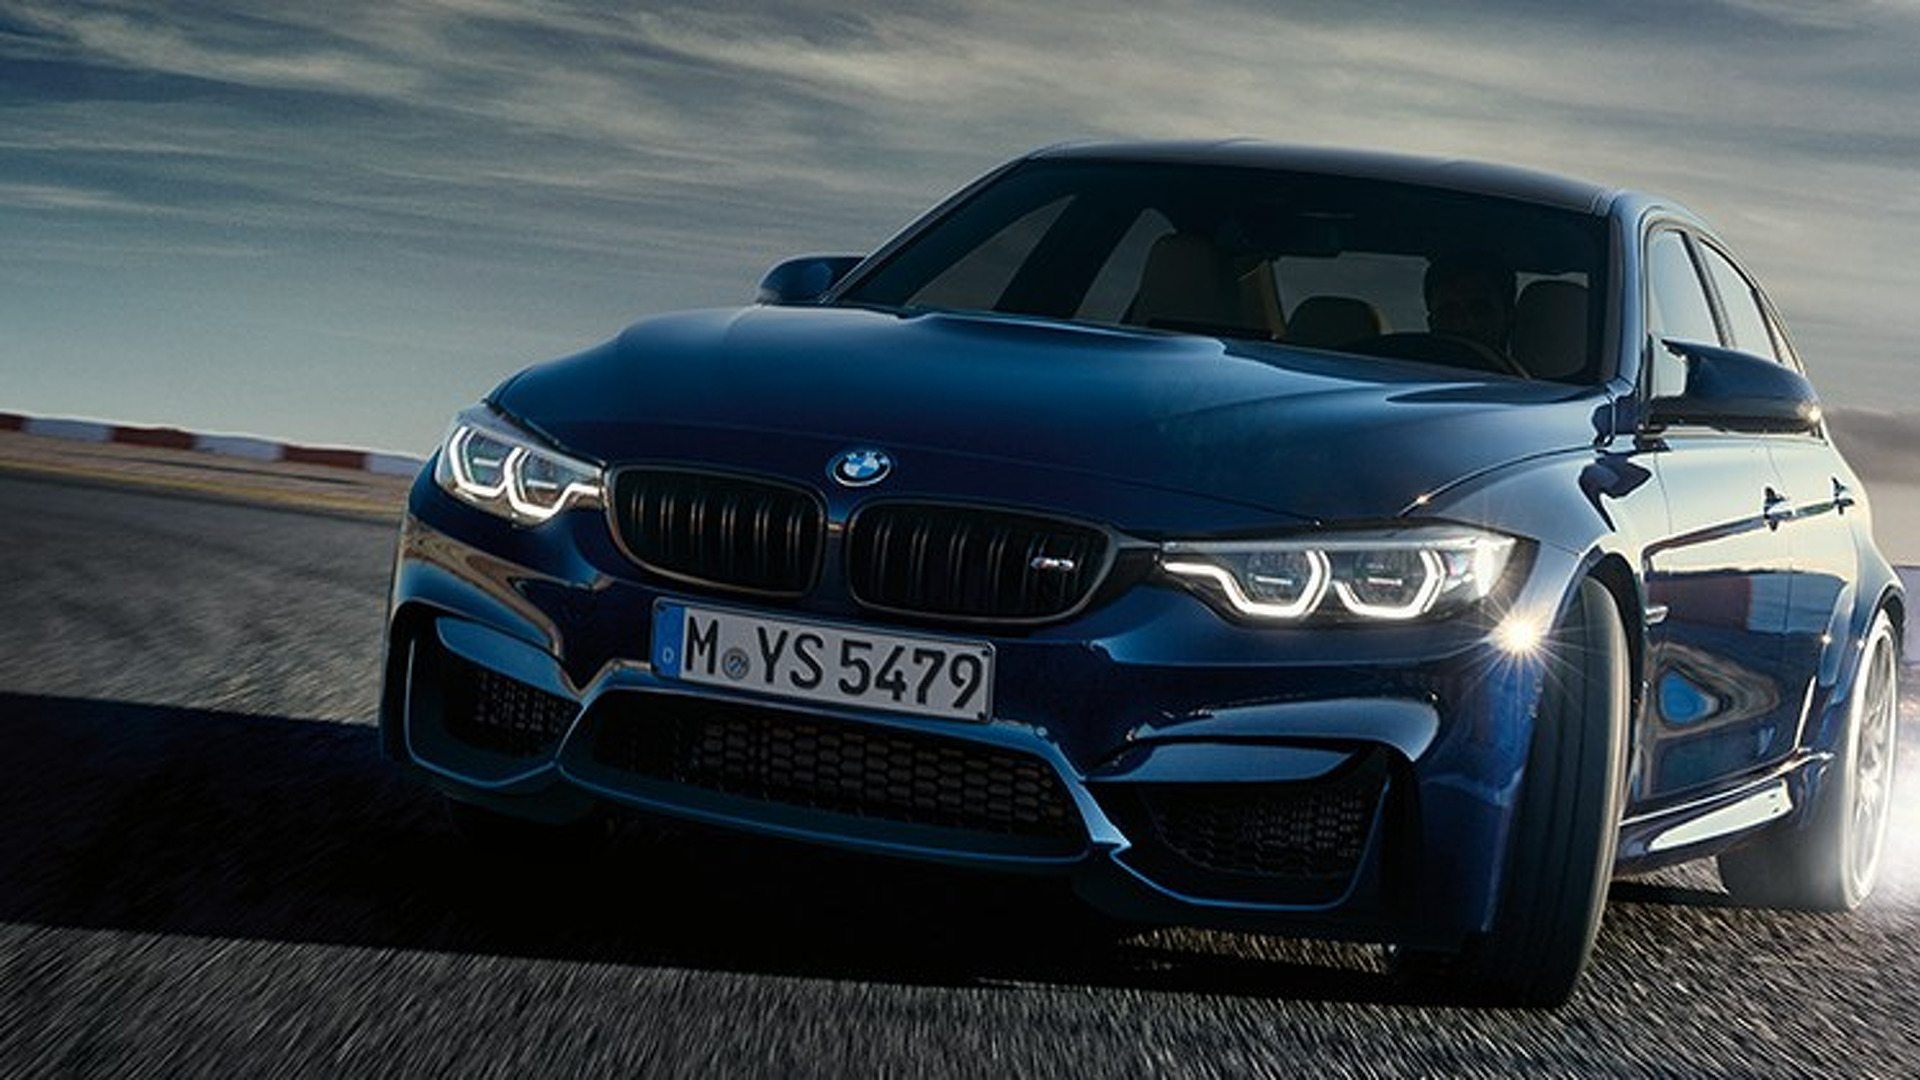 2018 Bmw M3 Concept, Redesign and Review